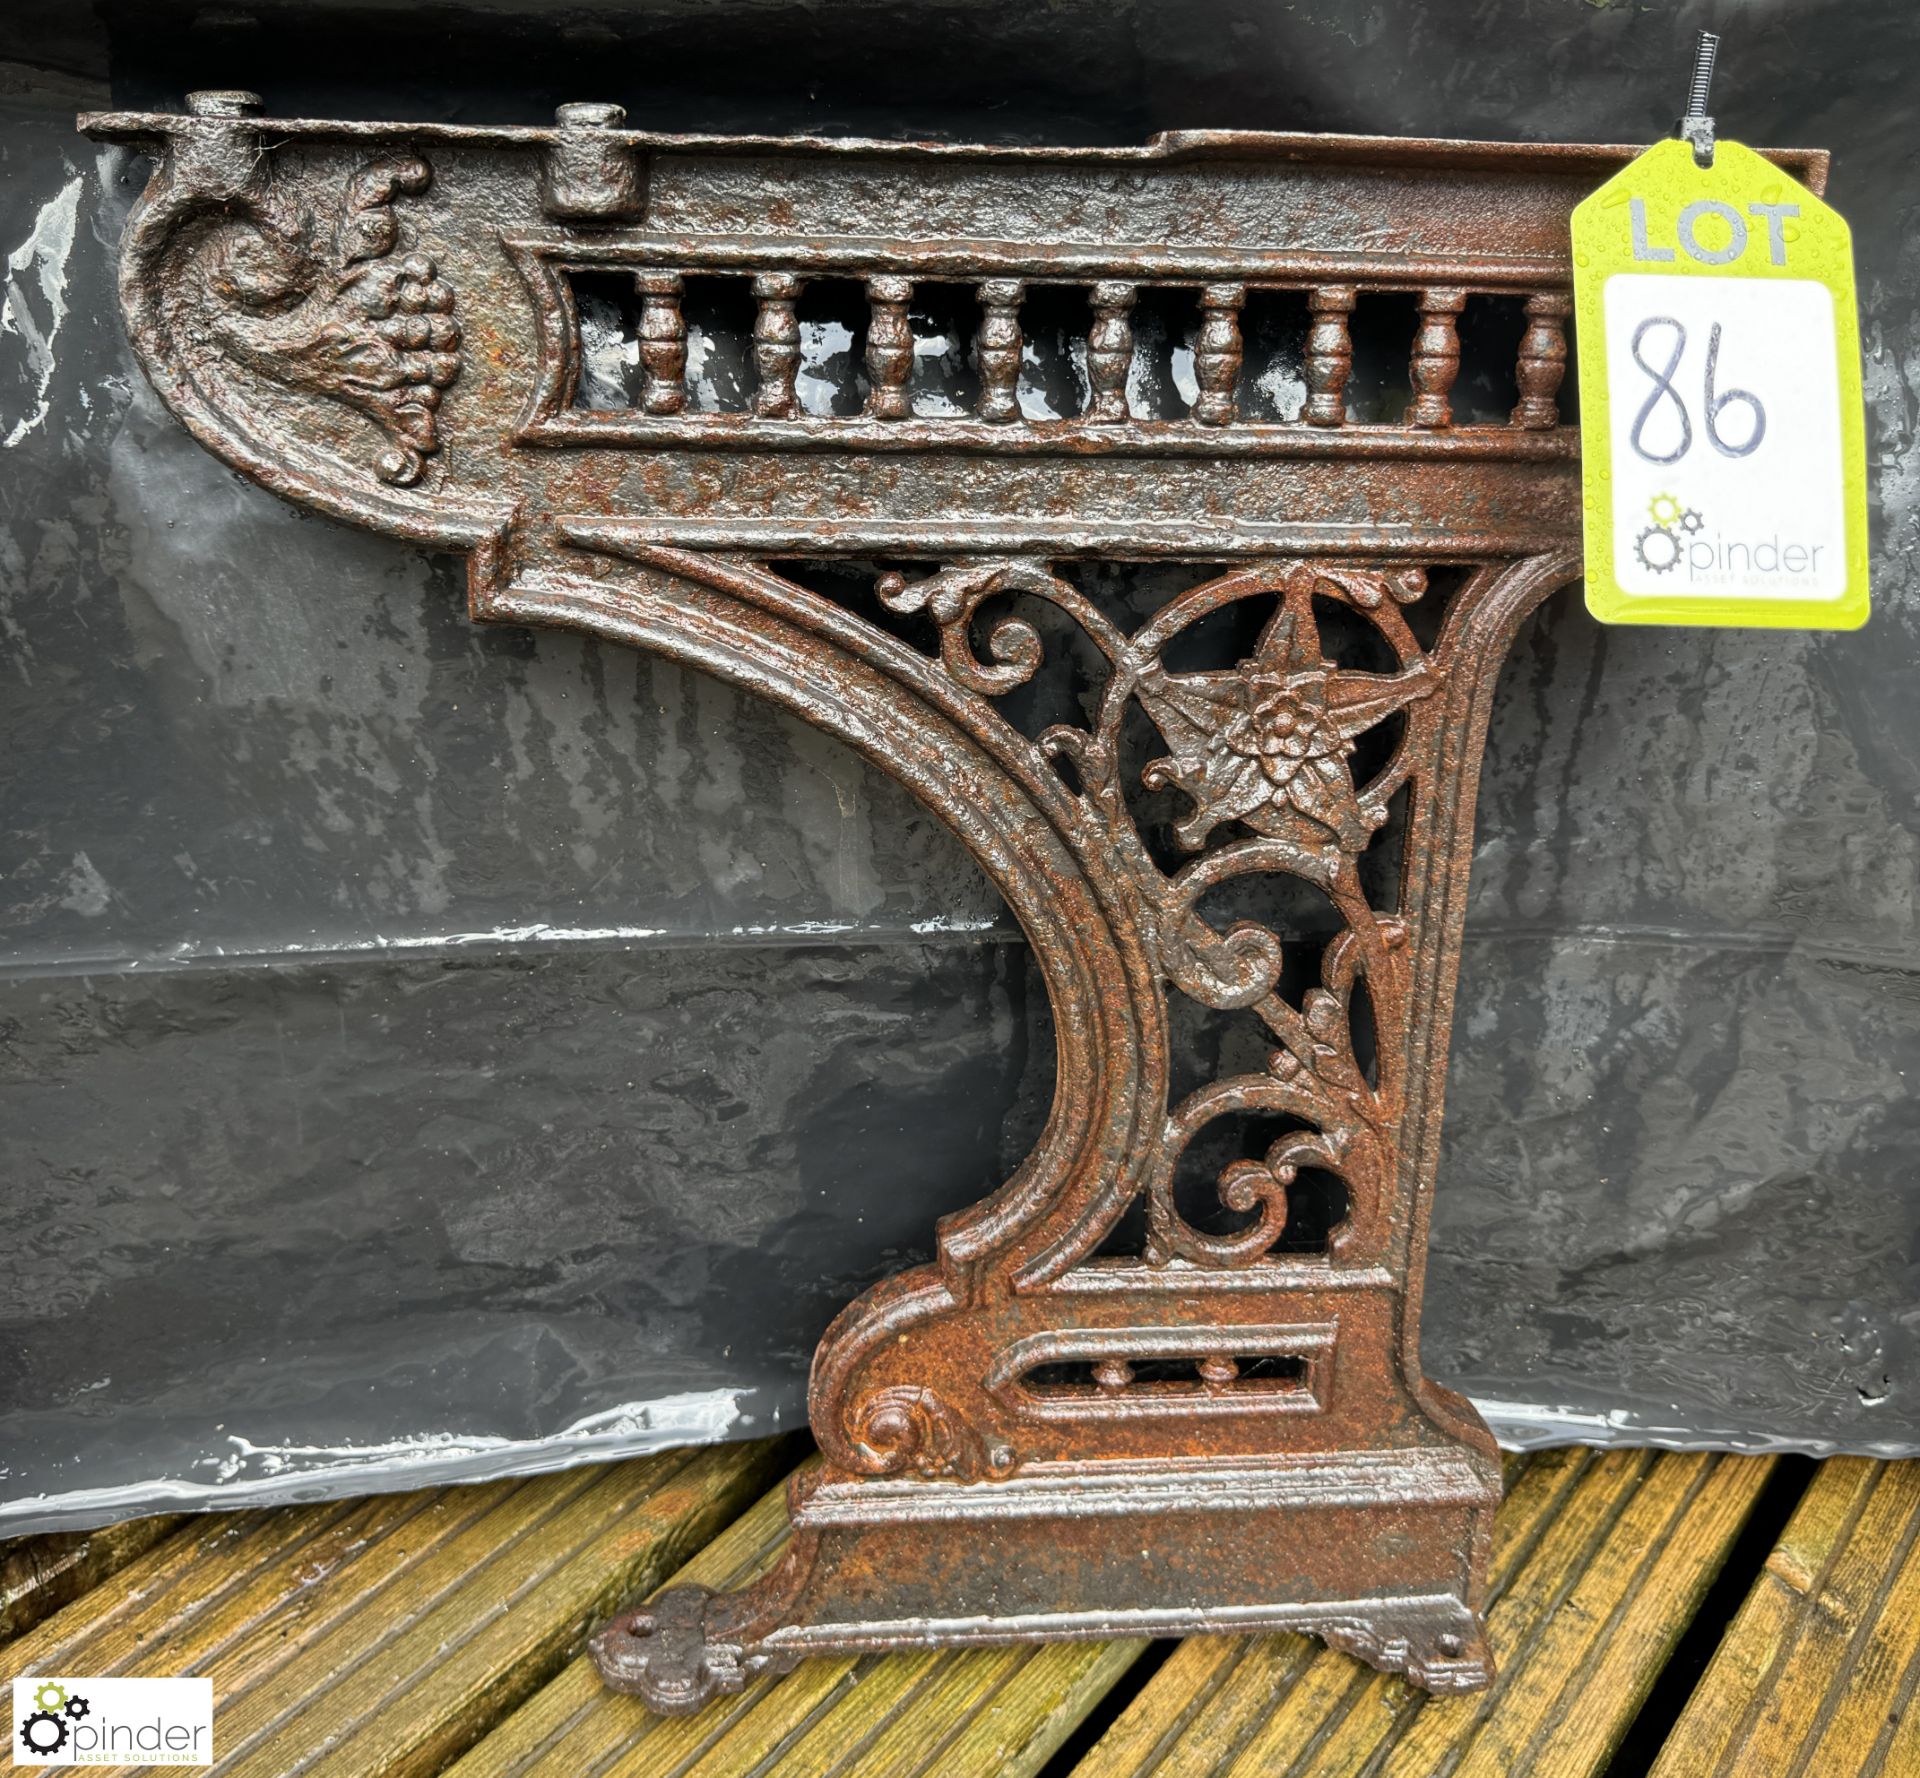 A pair cast iron Bench Brackets, with RD identification number “N84000 model no 1351”, approx. - Image 3 of 5